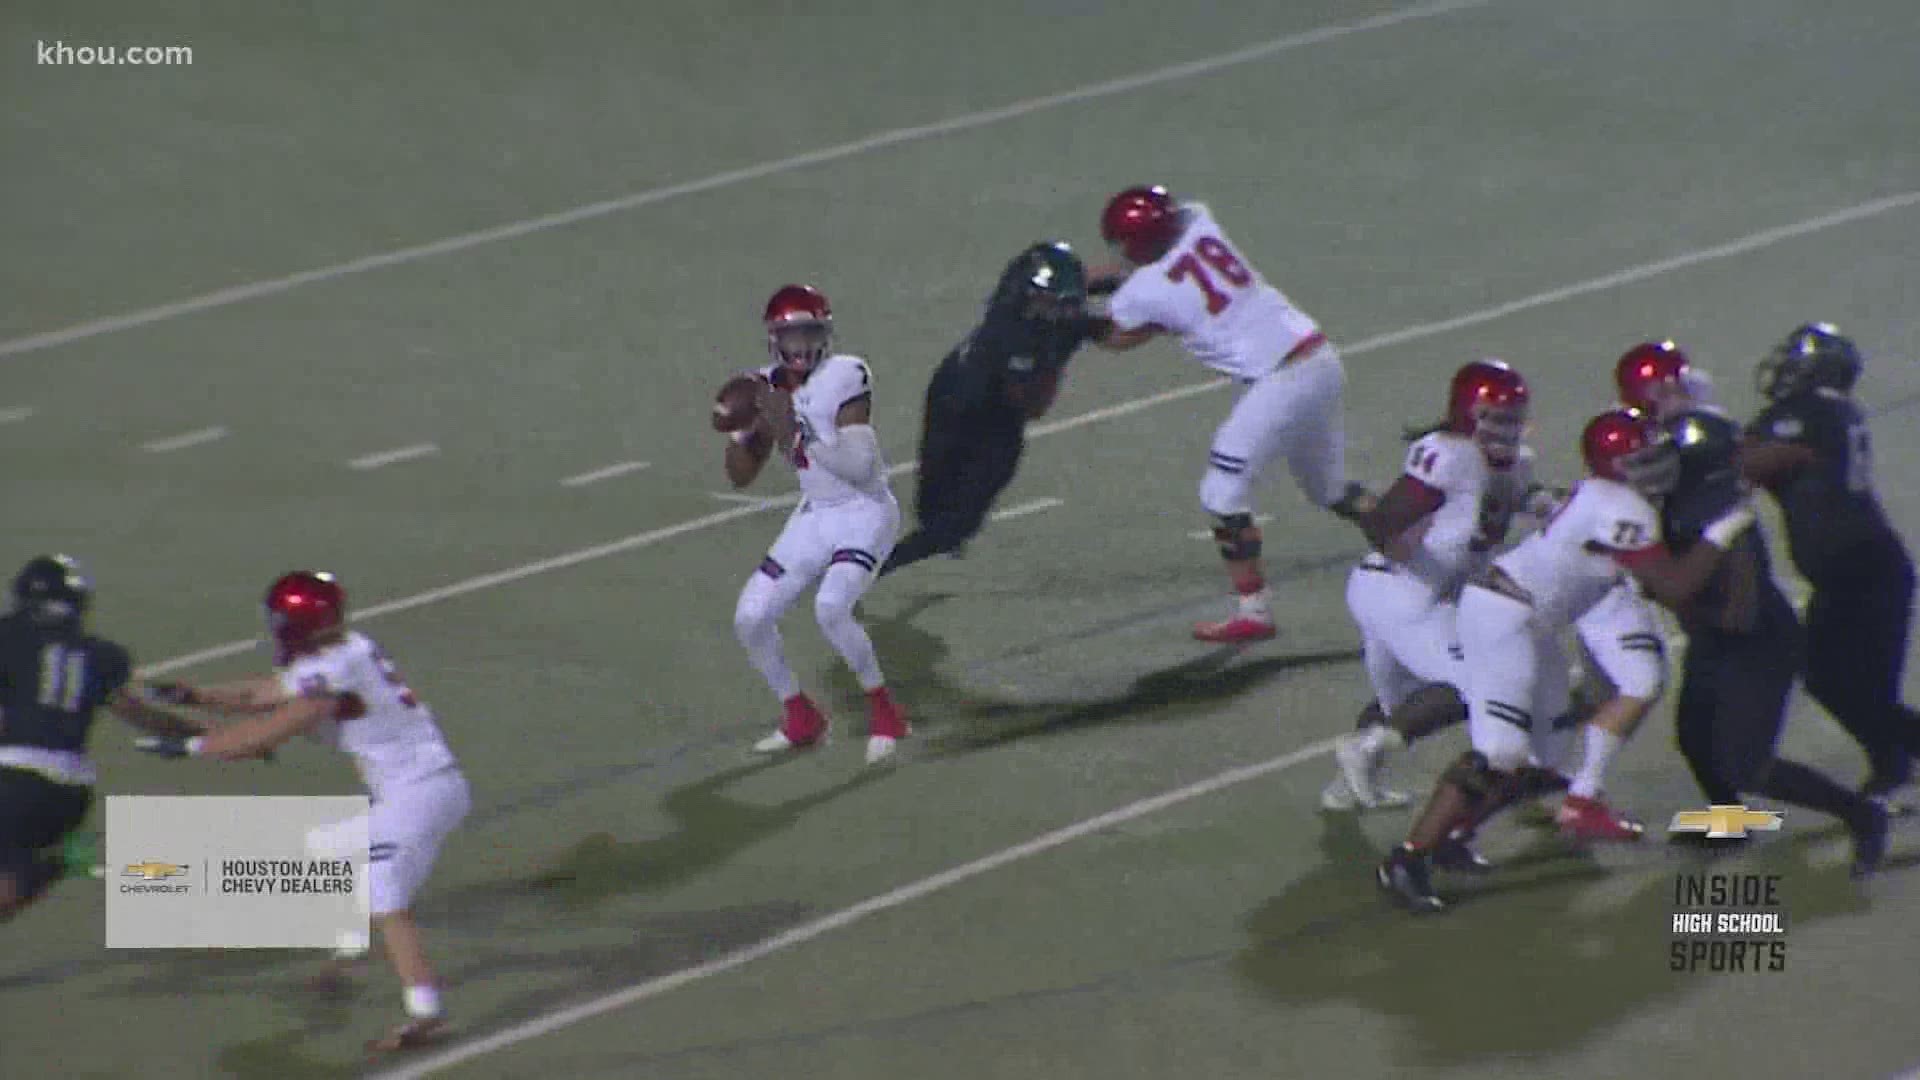 North Shore wins big. Meanwhile, Manvel deals with injuries on the way to the playoffs.